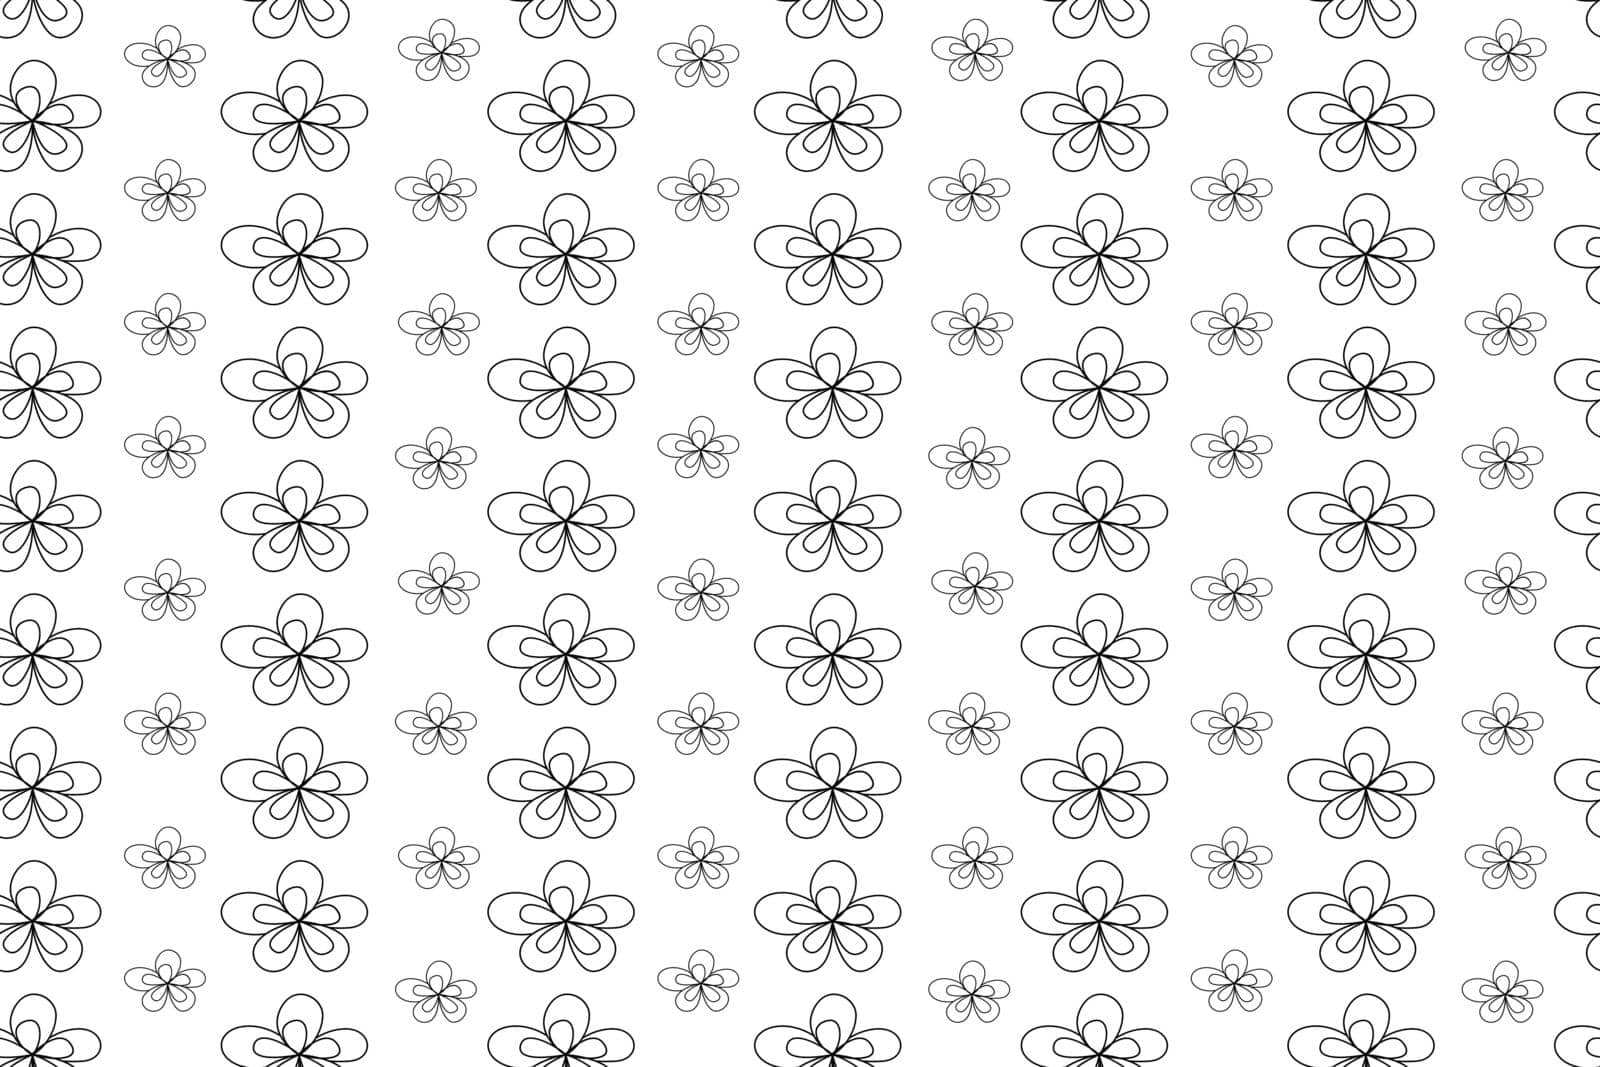 Pattern with outline flowers on white background. Hand-drawn seamless floral doodles. For art texture, wallpapers, wrapping paper or invitation. Vector illustration